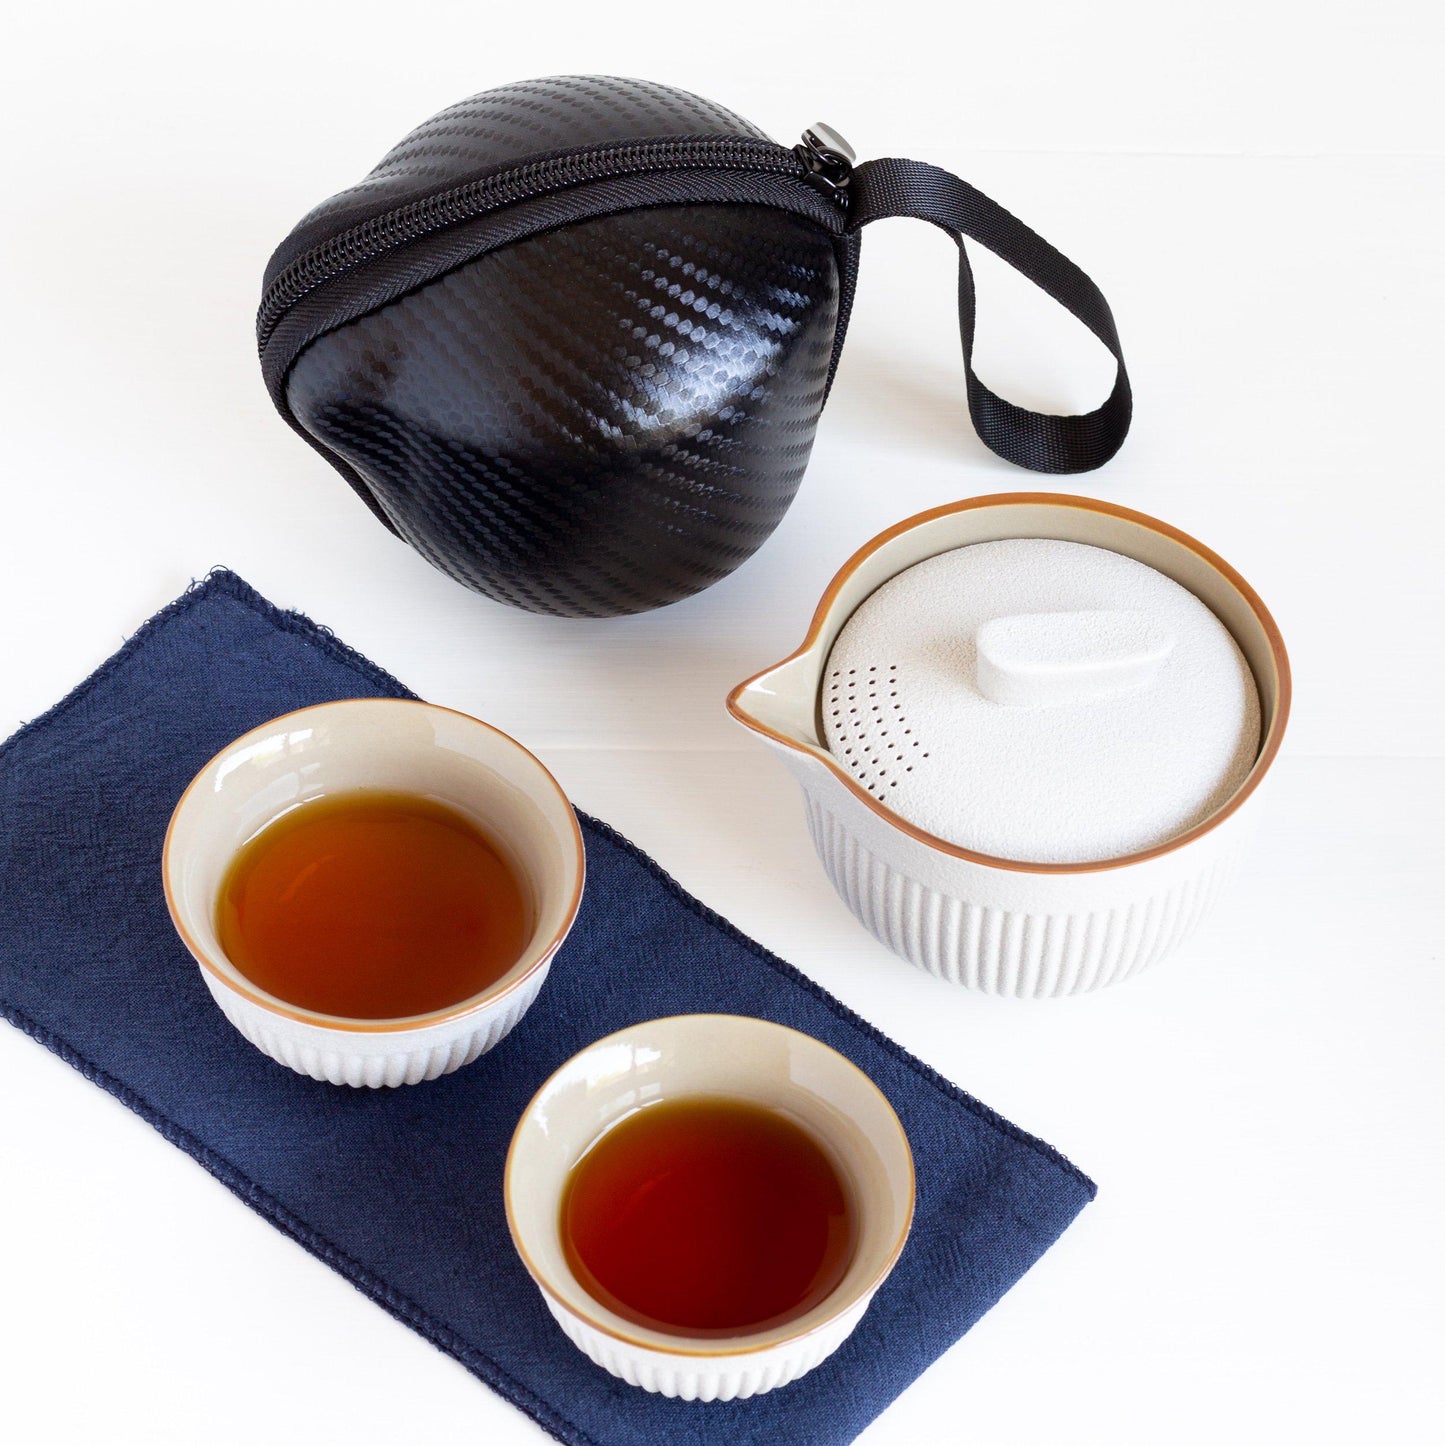 Tea travel set with brewed tea in two cups